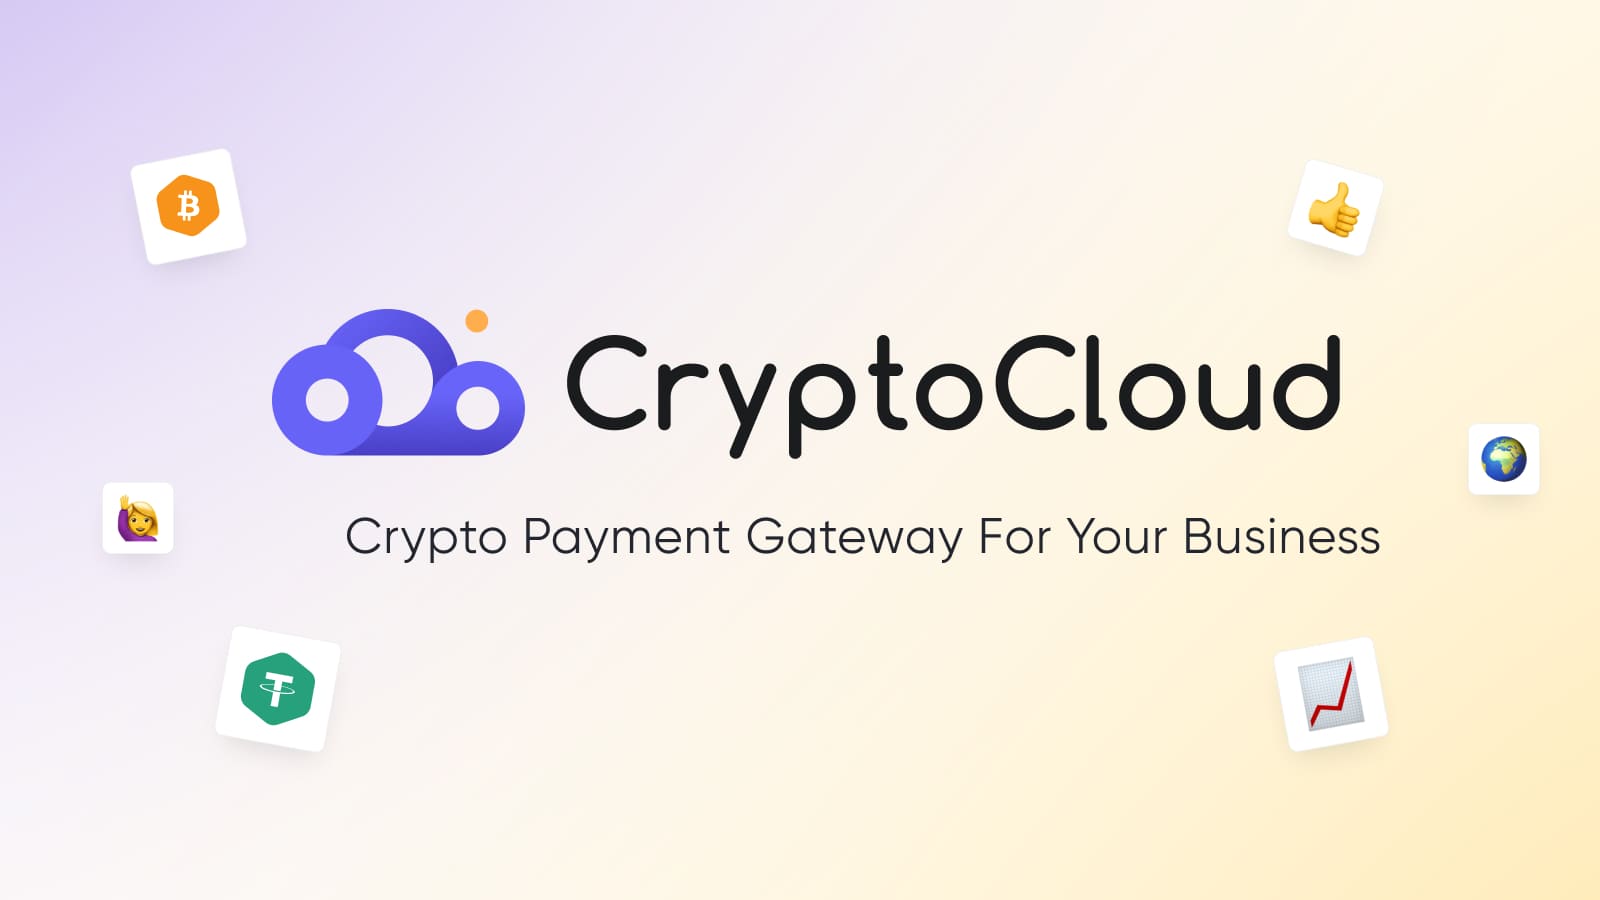 CryptoCloud allows you to accept cryptocurrency payments in telegram bots, on websites, in online stores, etc.